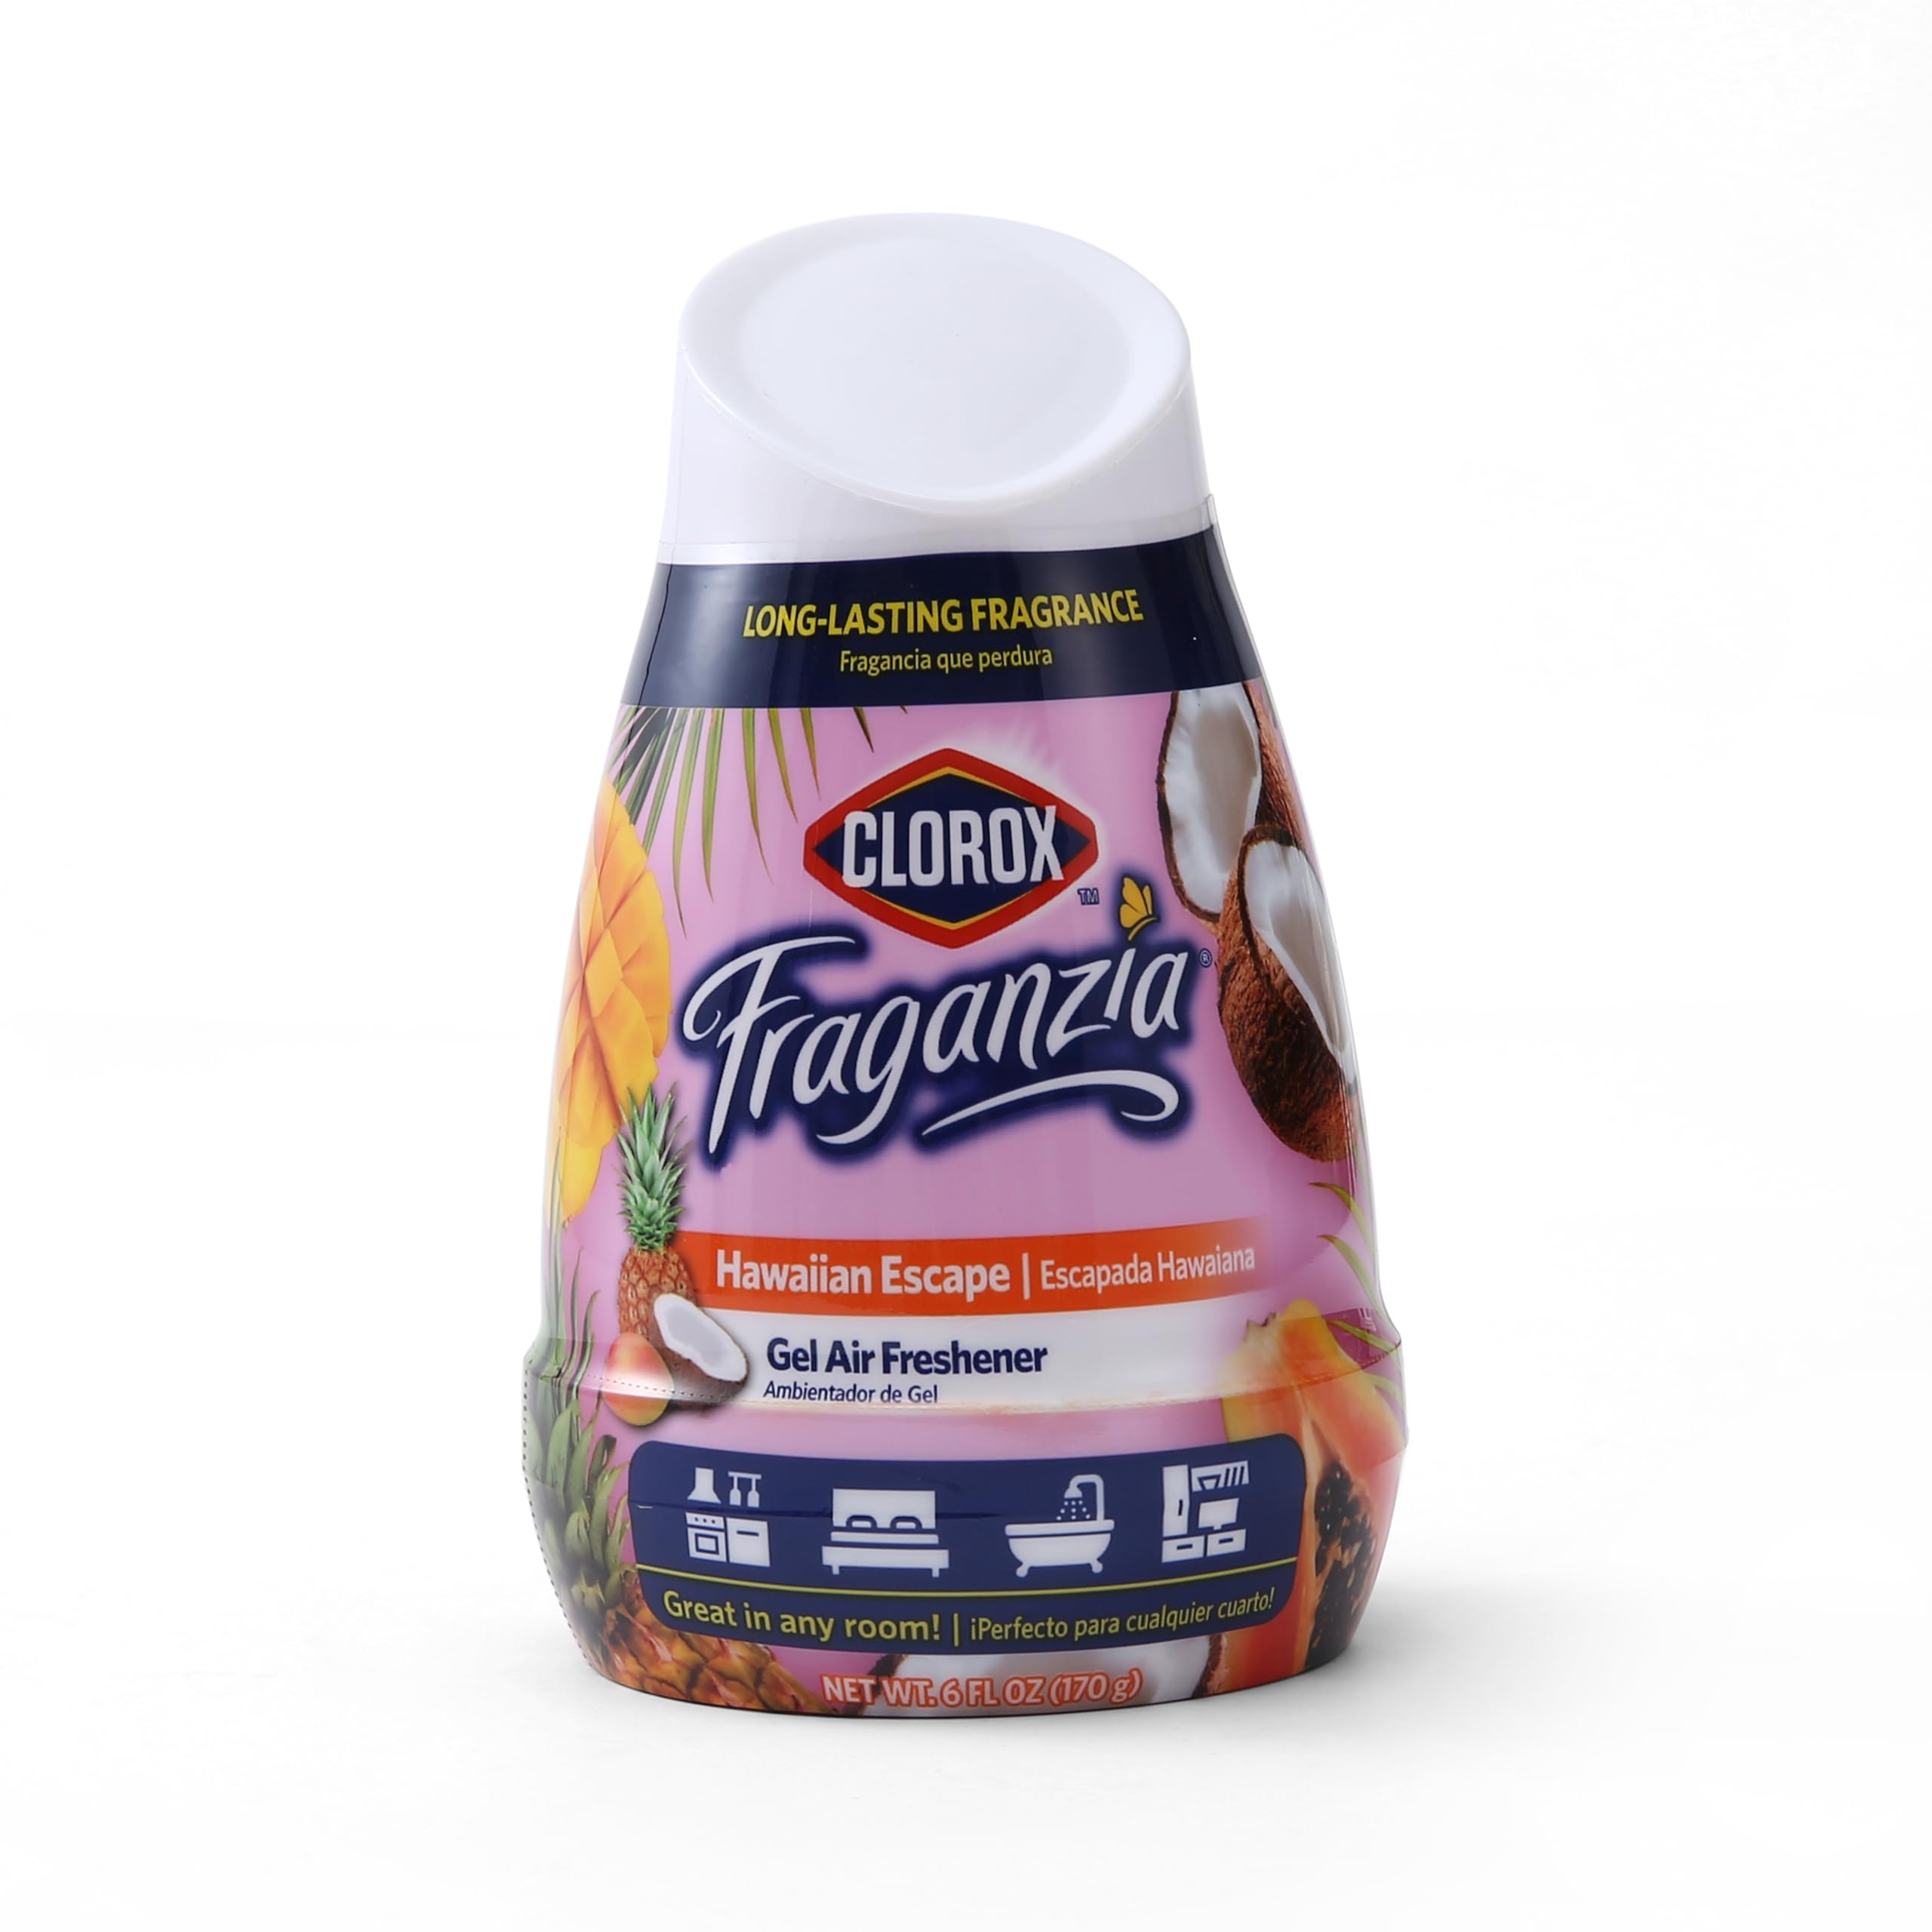 Clorox Fraganzia Gel Air Freshener Cone in Hawaiian Escape Scent, 6oz | No-Plug, Battery-Free Air Freshener for Small Rooms, Closets, Kitchens, Bathrooms, Offices and More